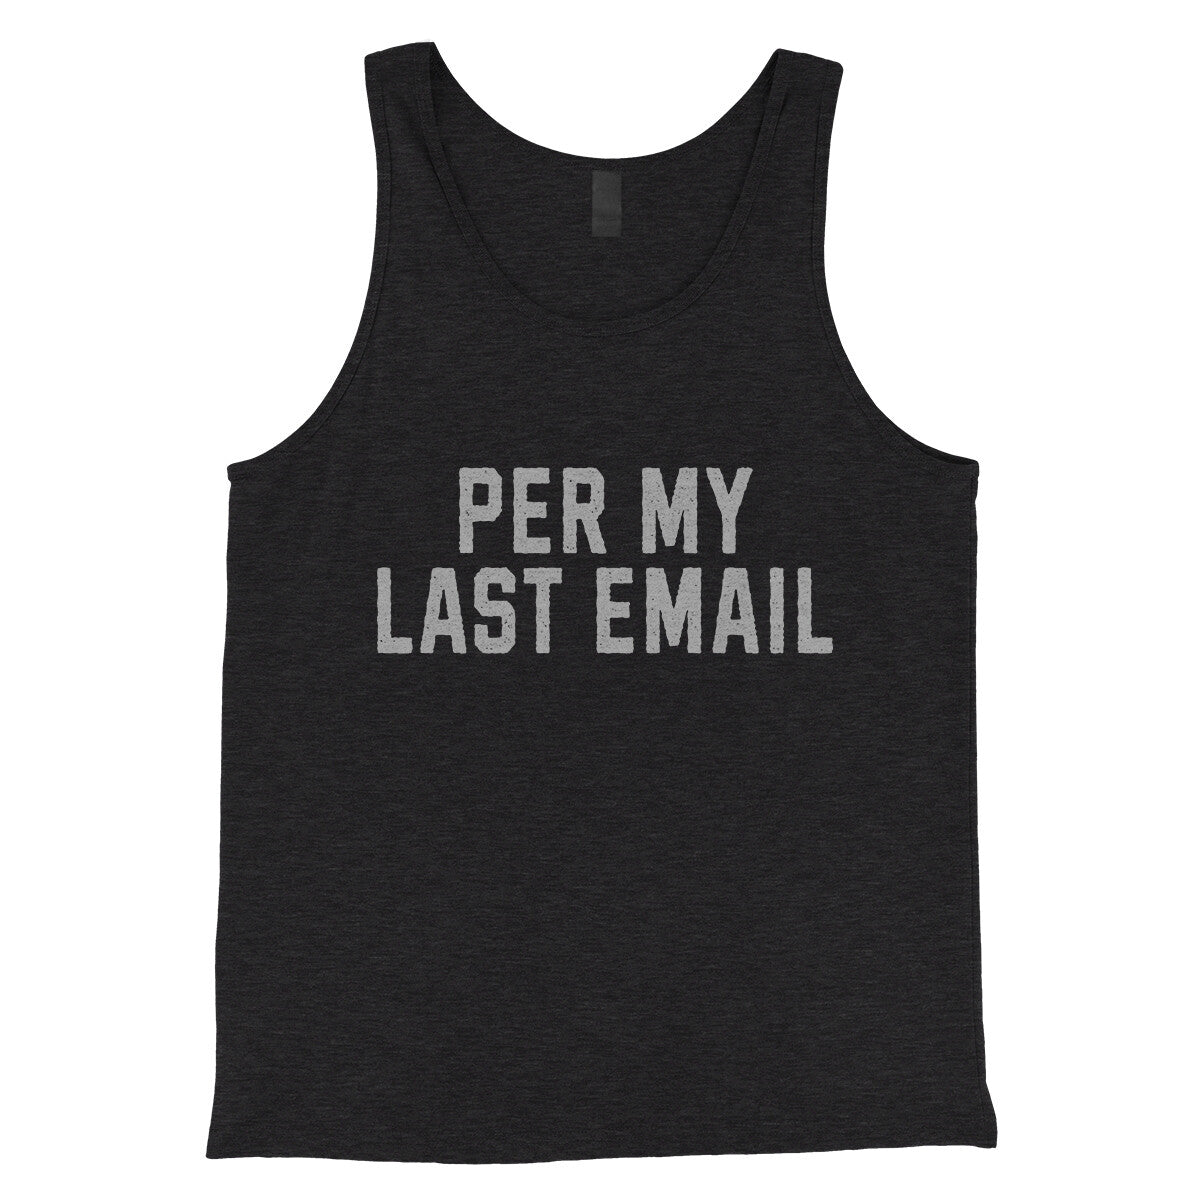 Per My Last Email in Charcoal Black TriBlend Color